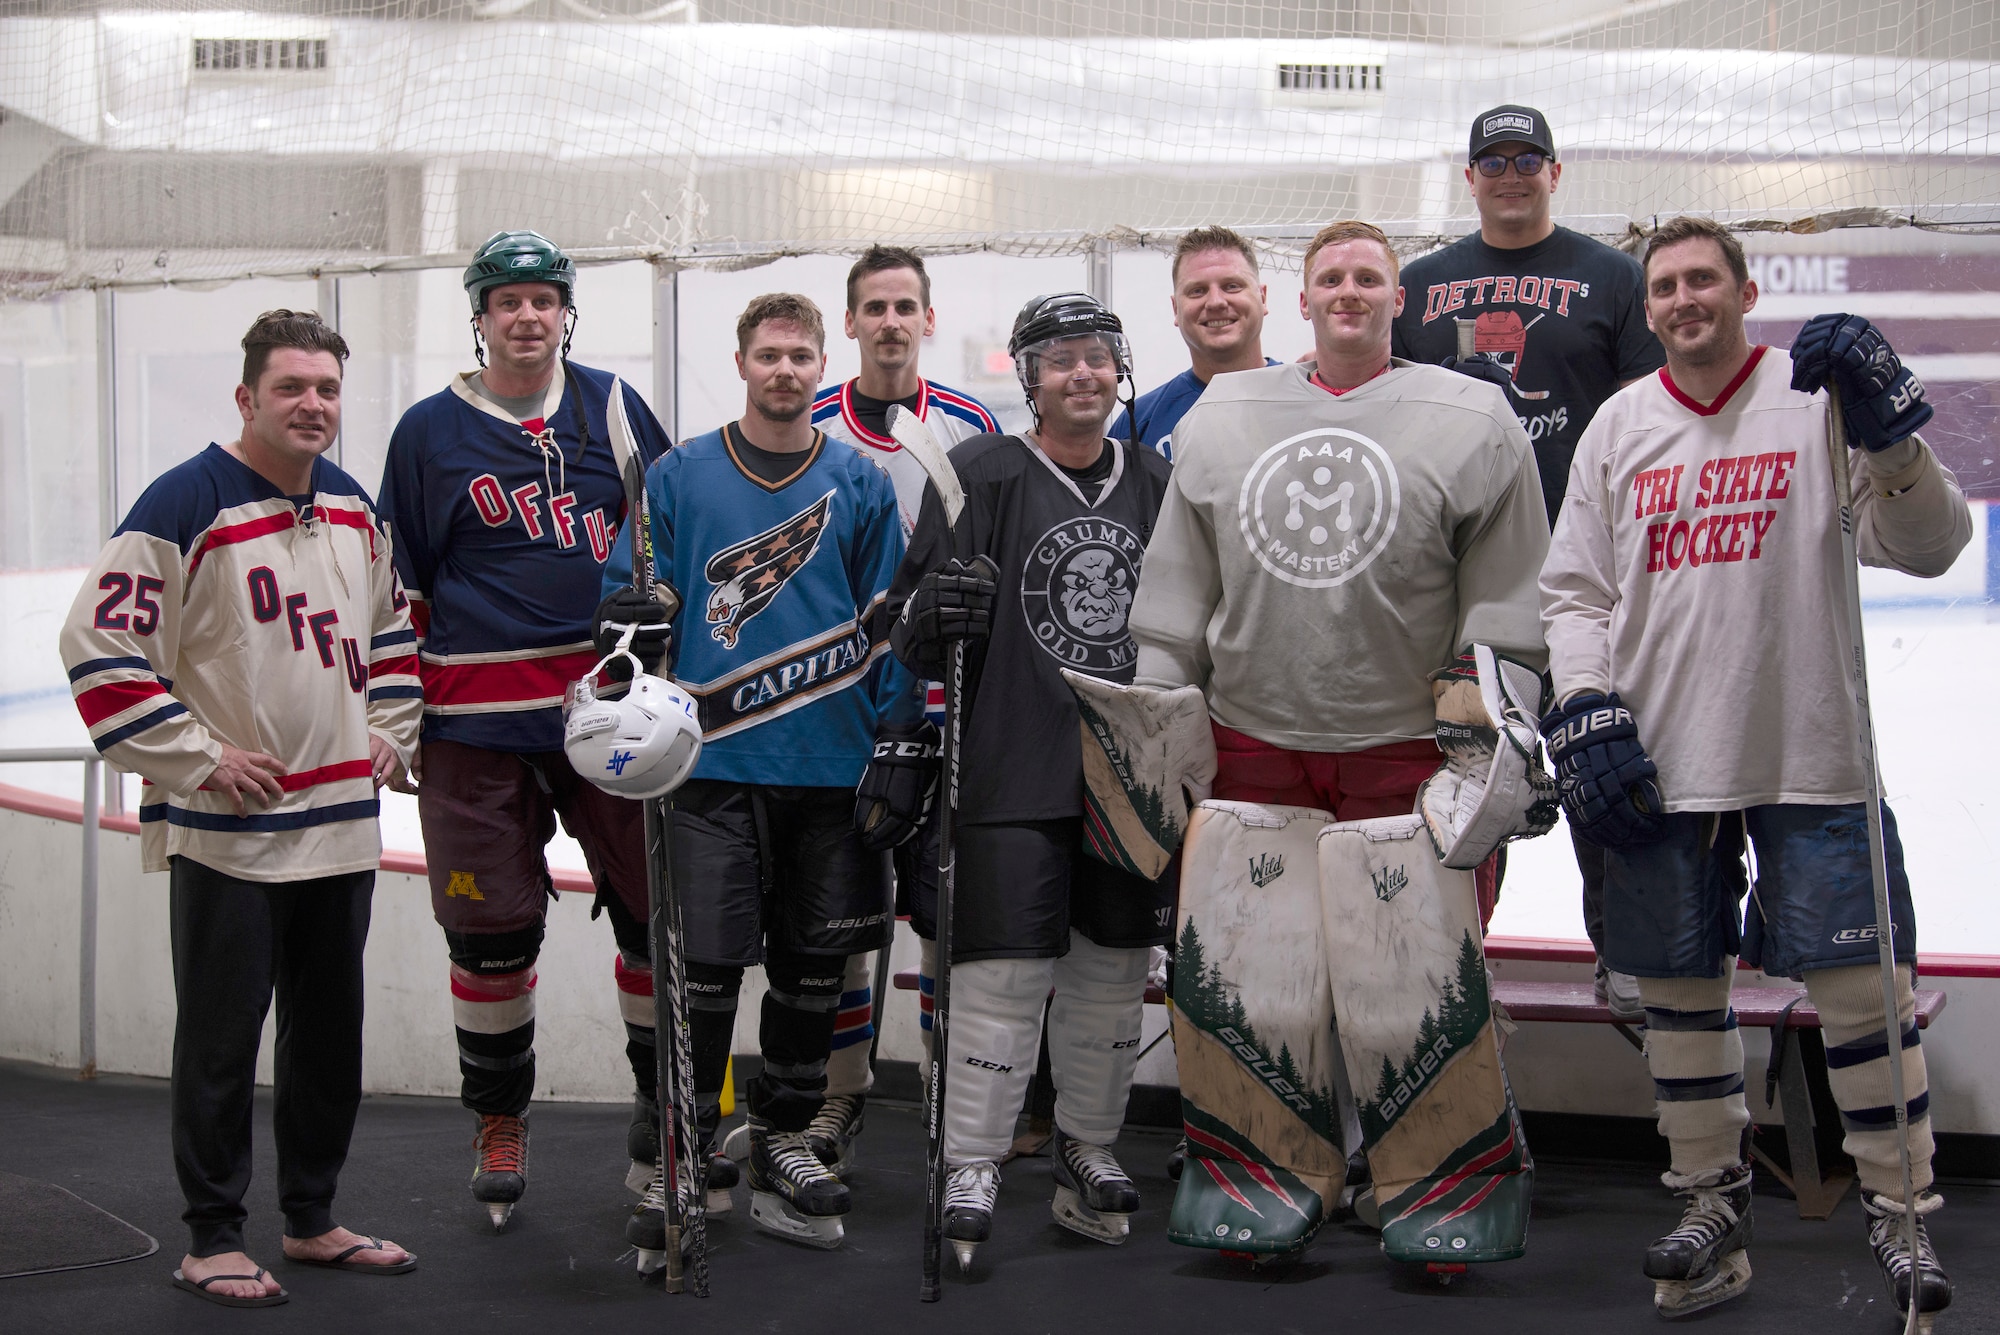 A group of hockey players pose for a photo after a practice in front of a hockey rink.